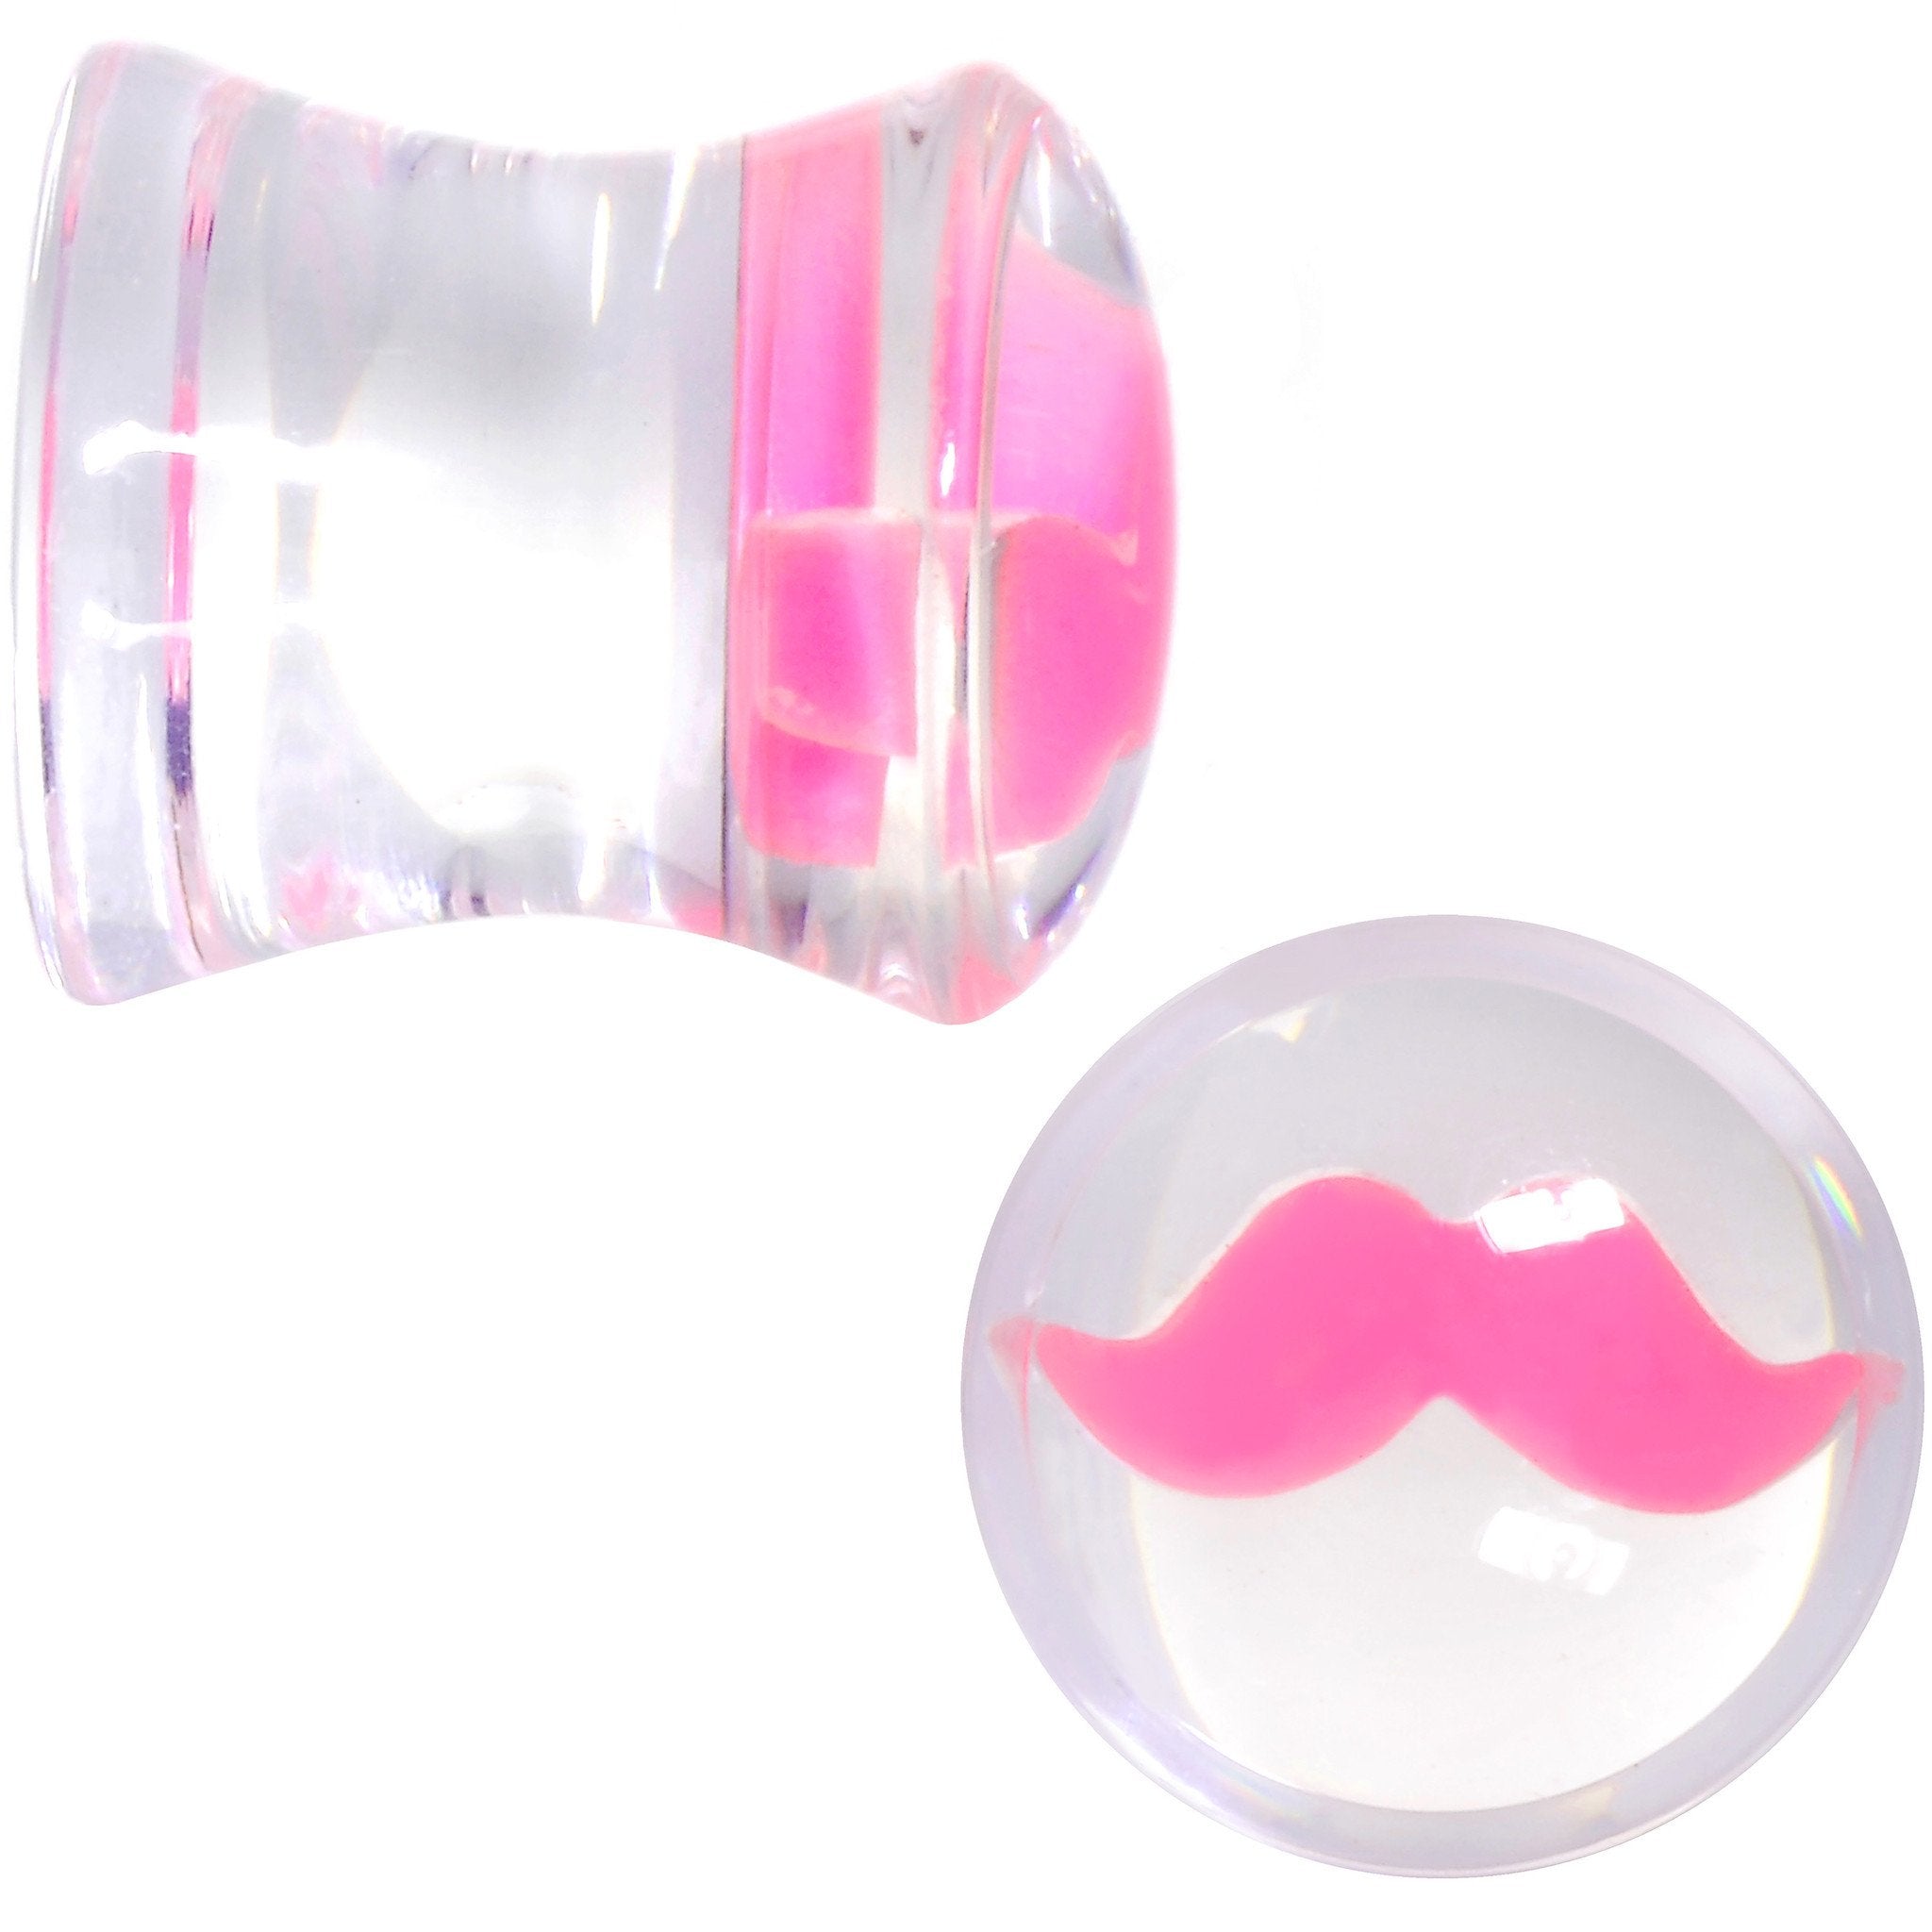 Clear Acrylic Pink Mustache Double Flare Saddle Plug Set 2 Gauge to 20mm